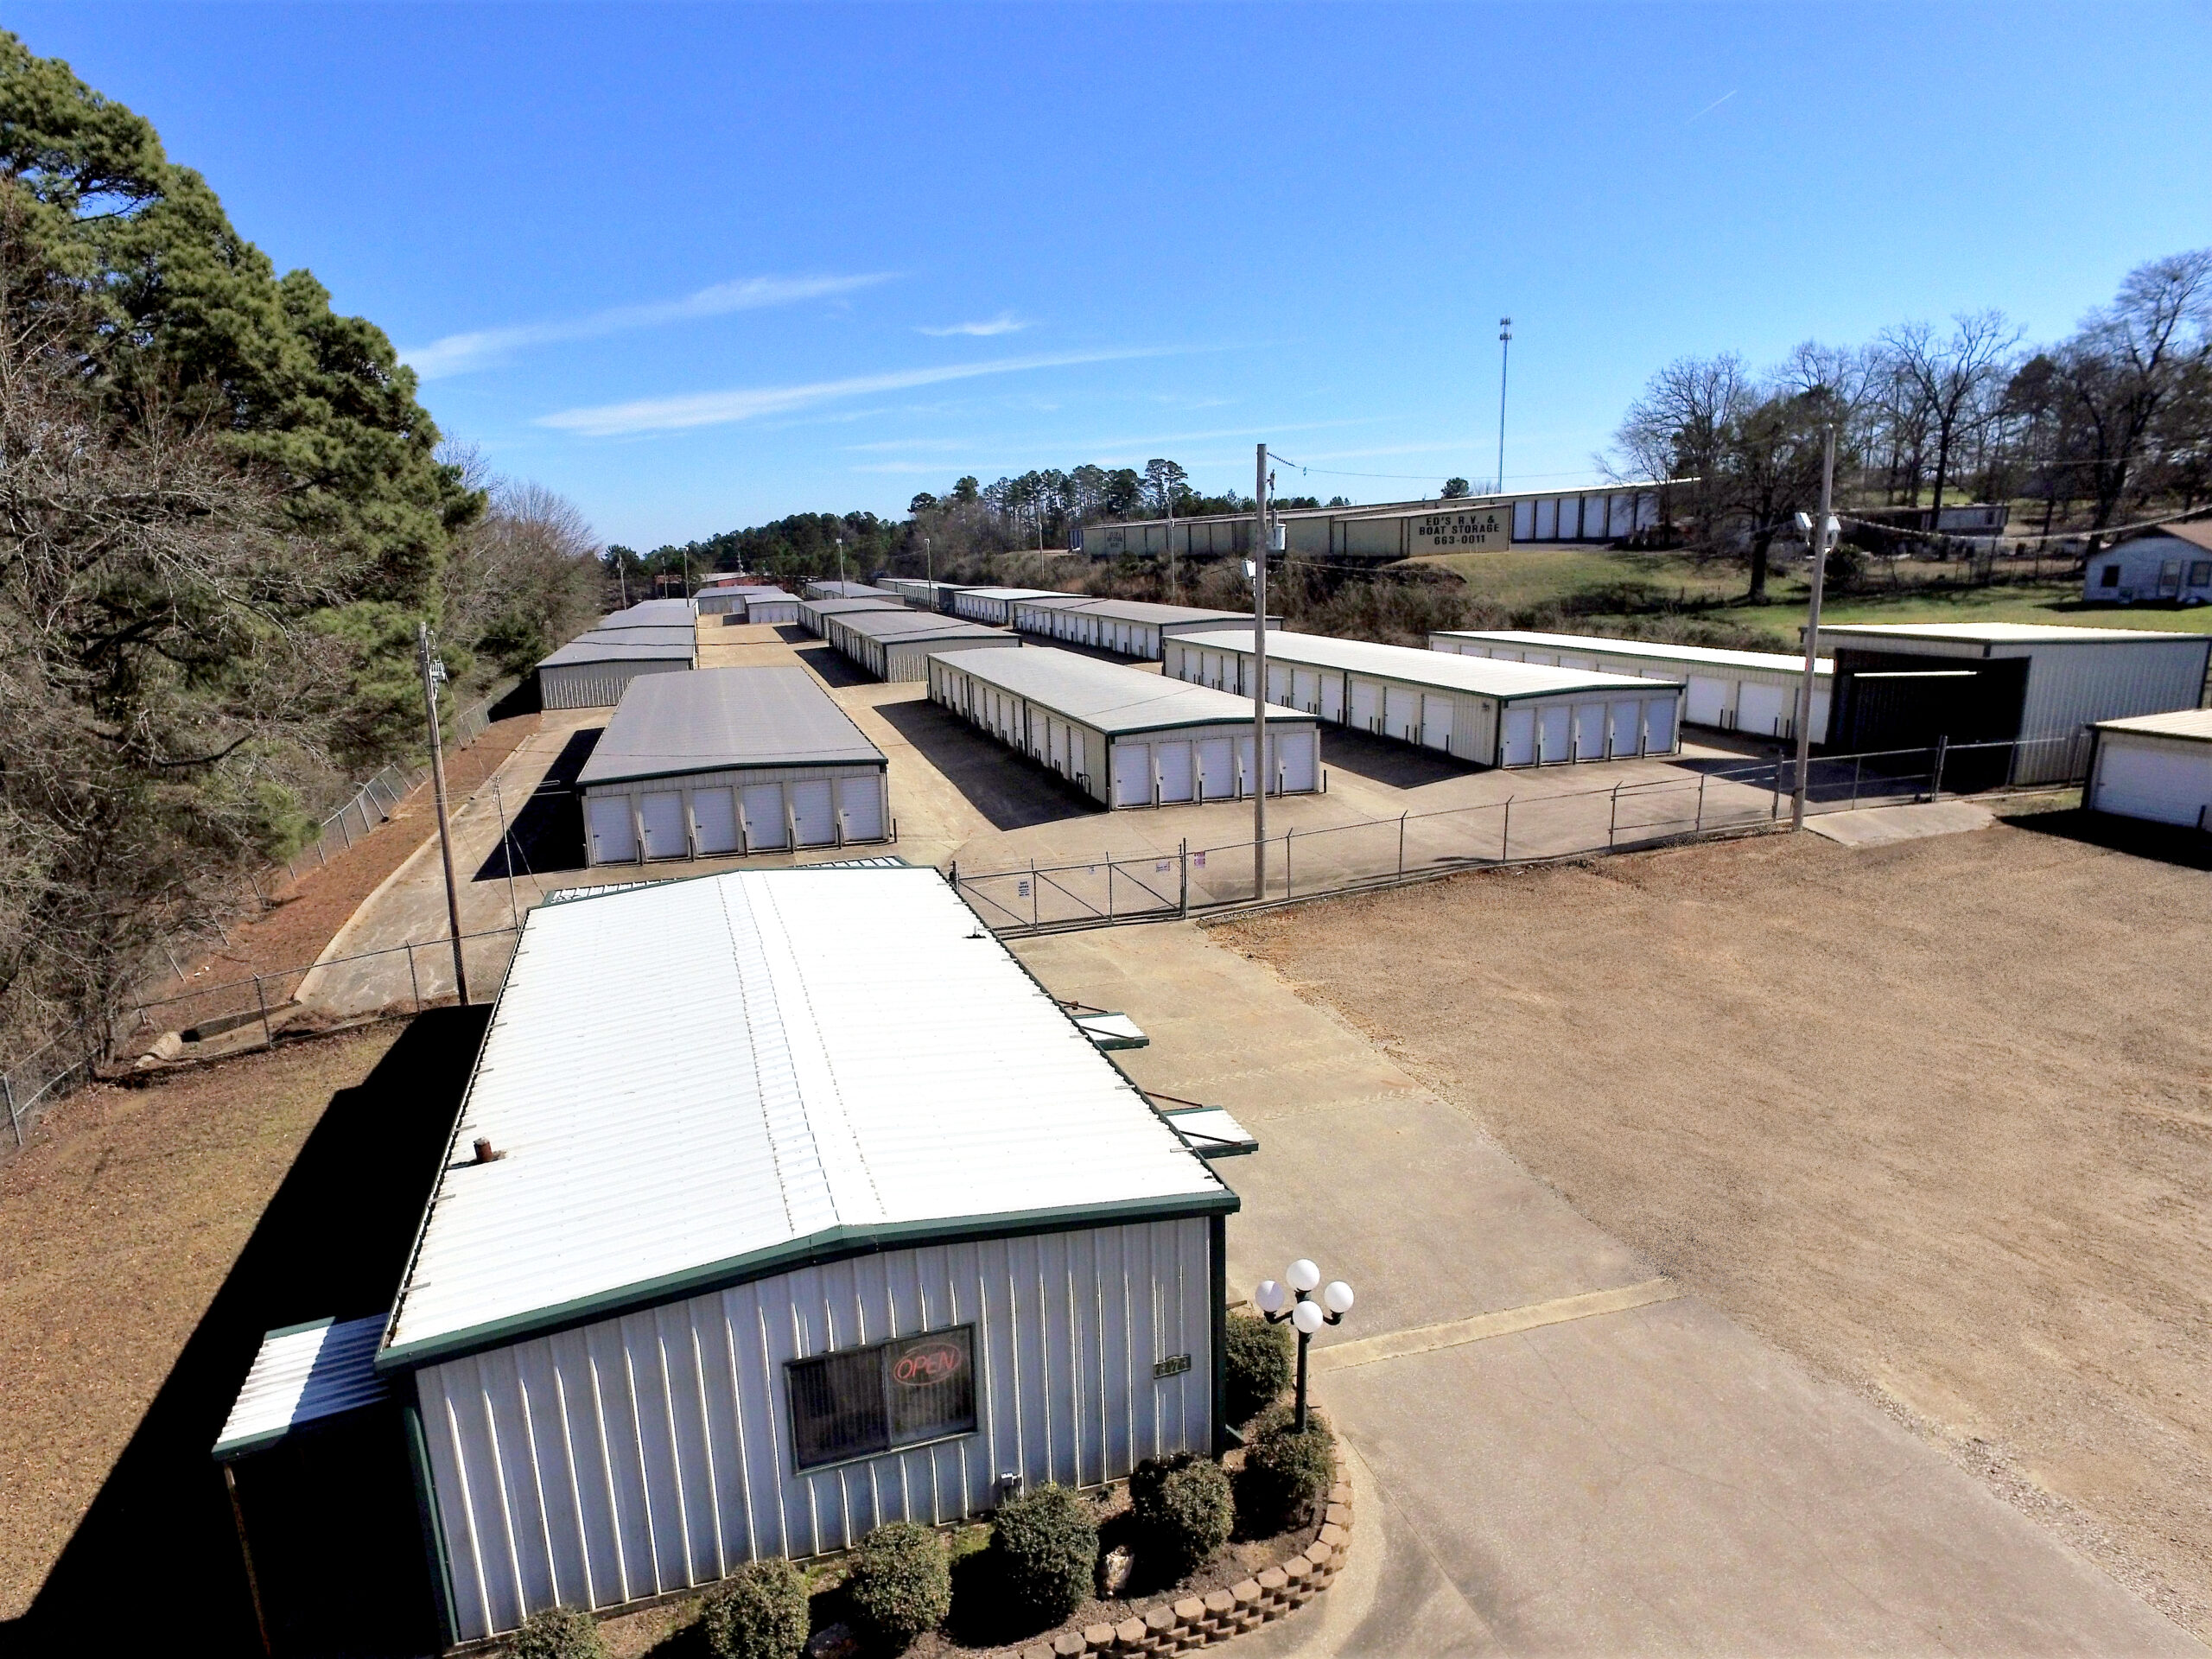 Stor 4 Now - Self Storage Facility For Sale by The Karr-Cunningham Storage Team in Texas